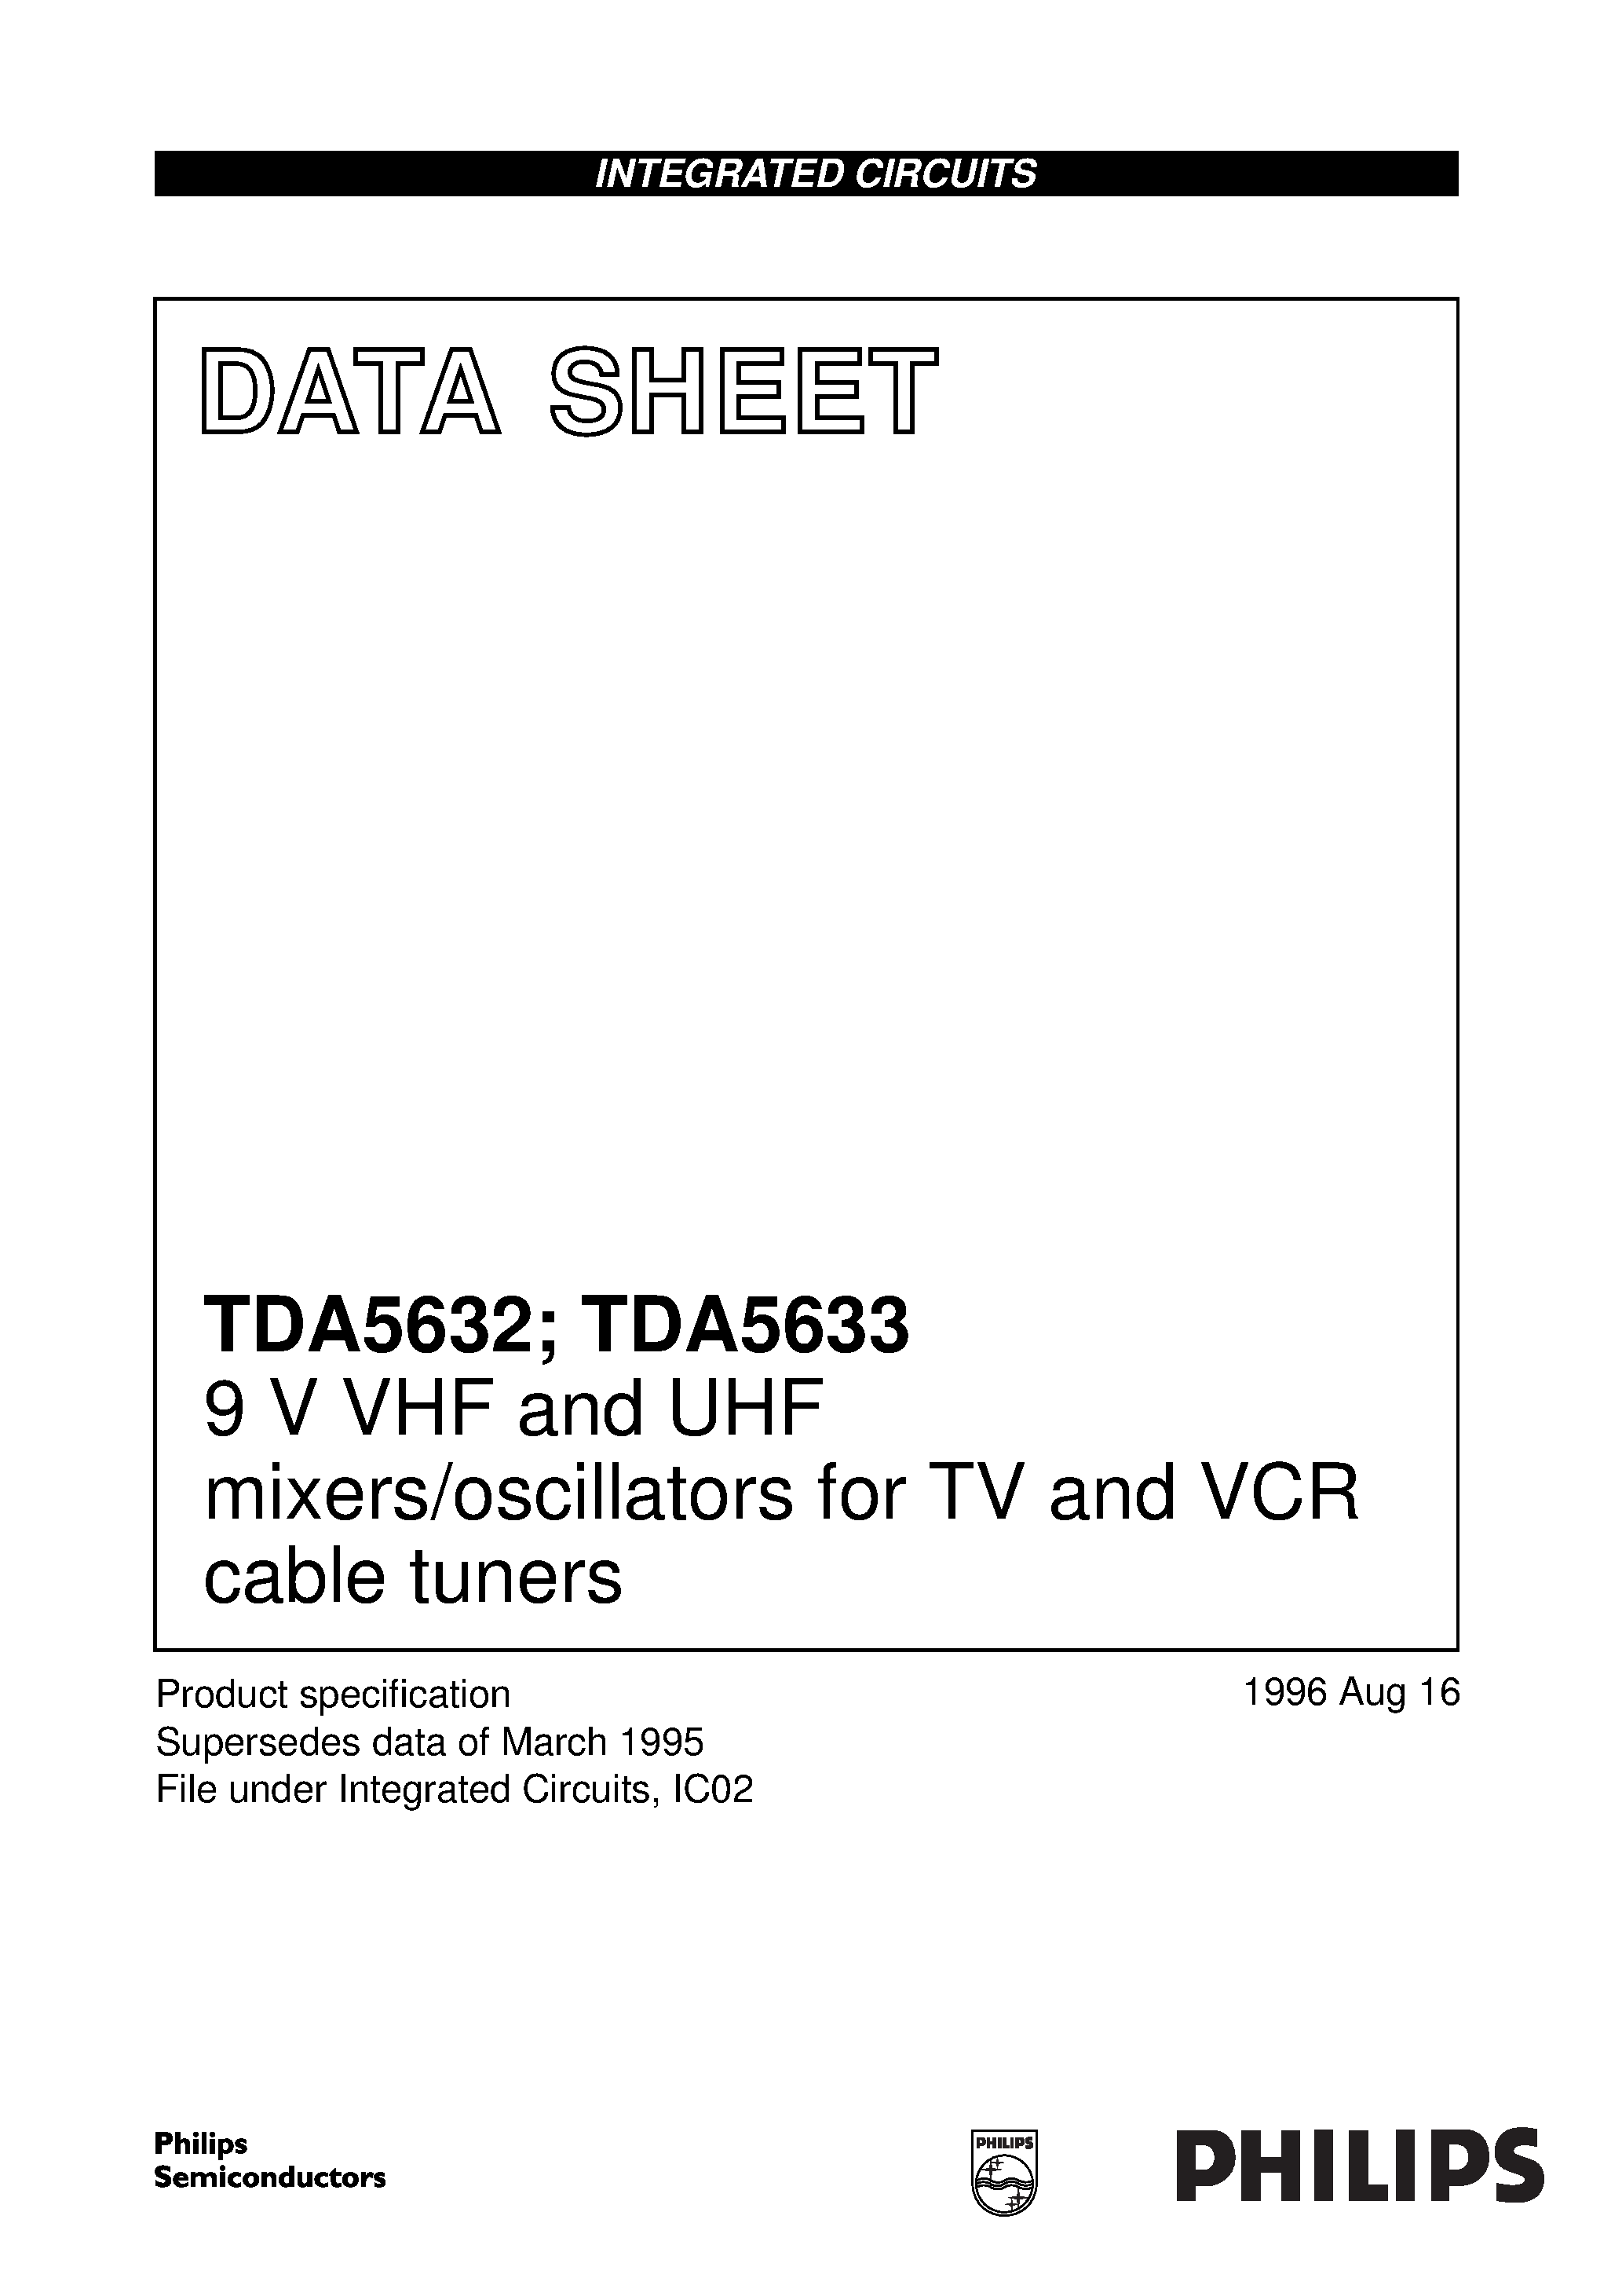 Даташит TDA5633M - 9 V VHF and UHF mixers/oscillators for TV and VCR cable tuners страница 1